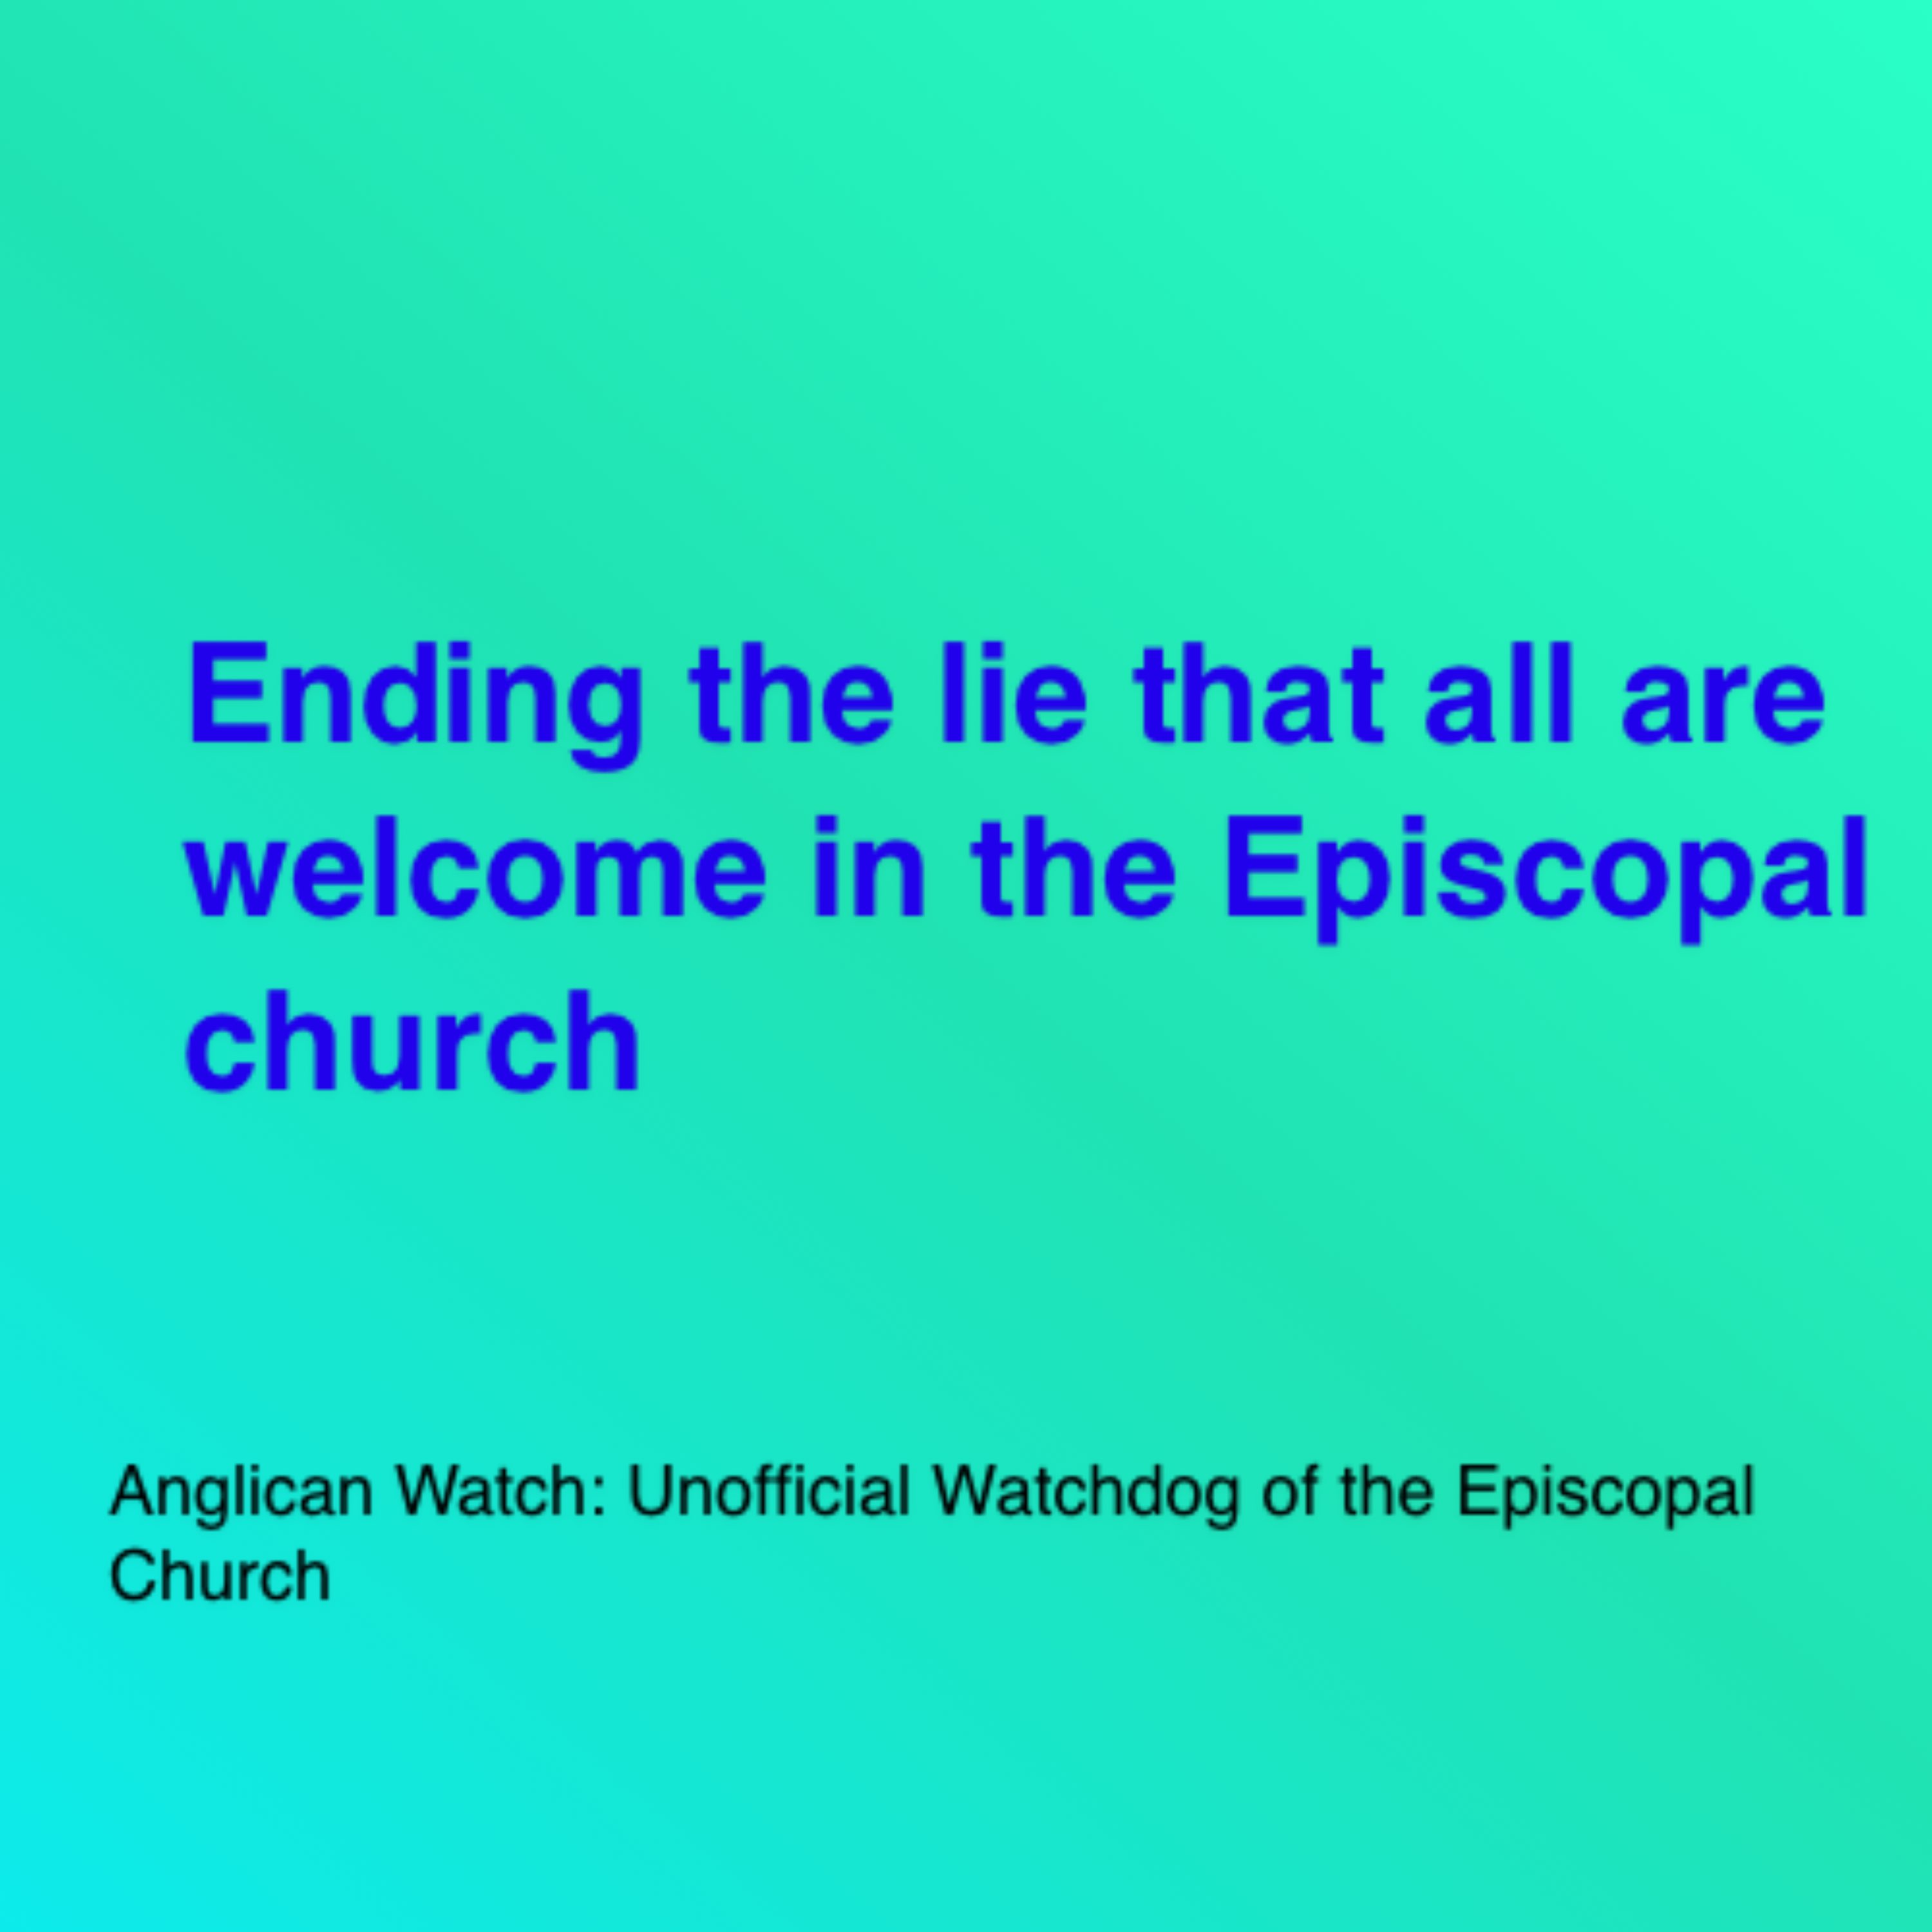 Ending the lie that all are welcome in the Episcopal church